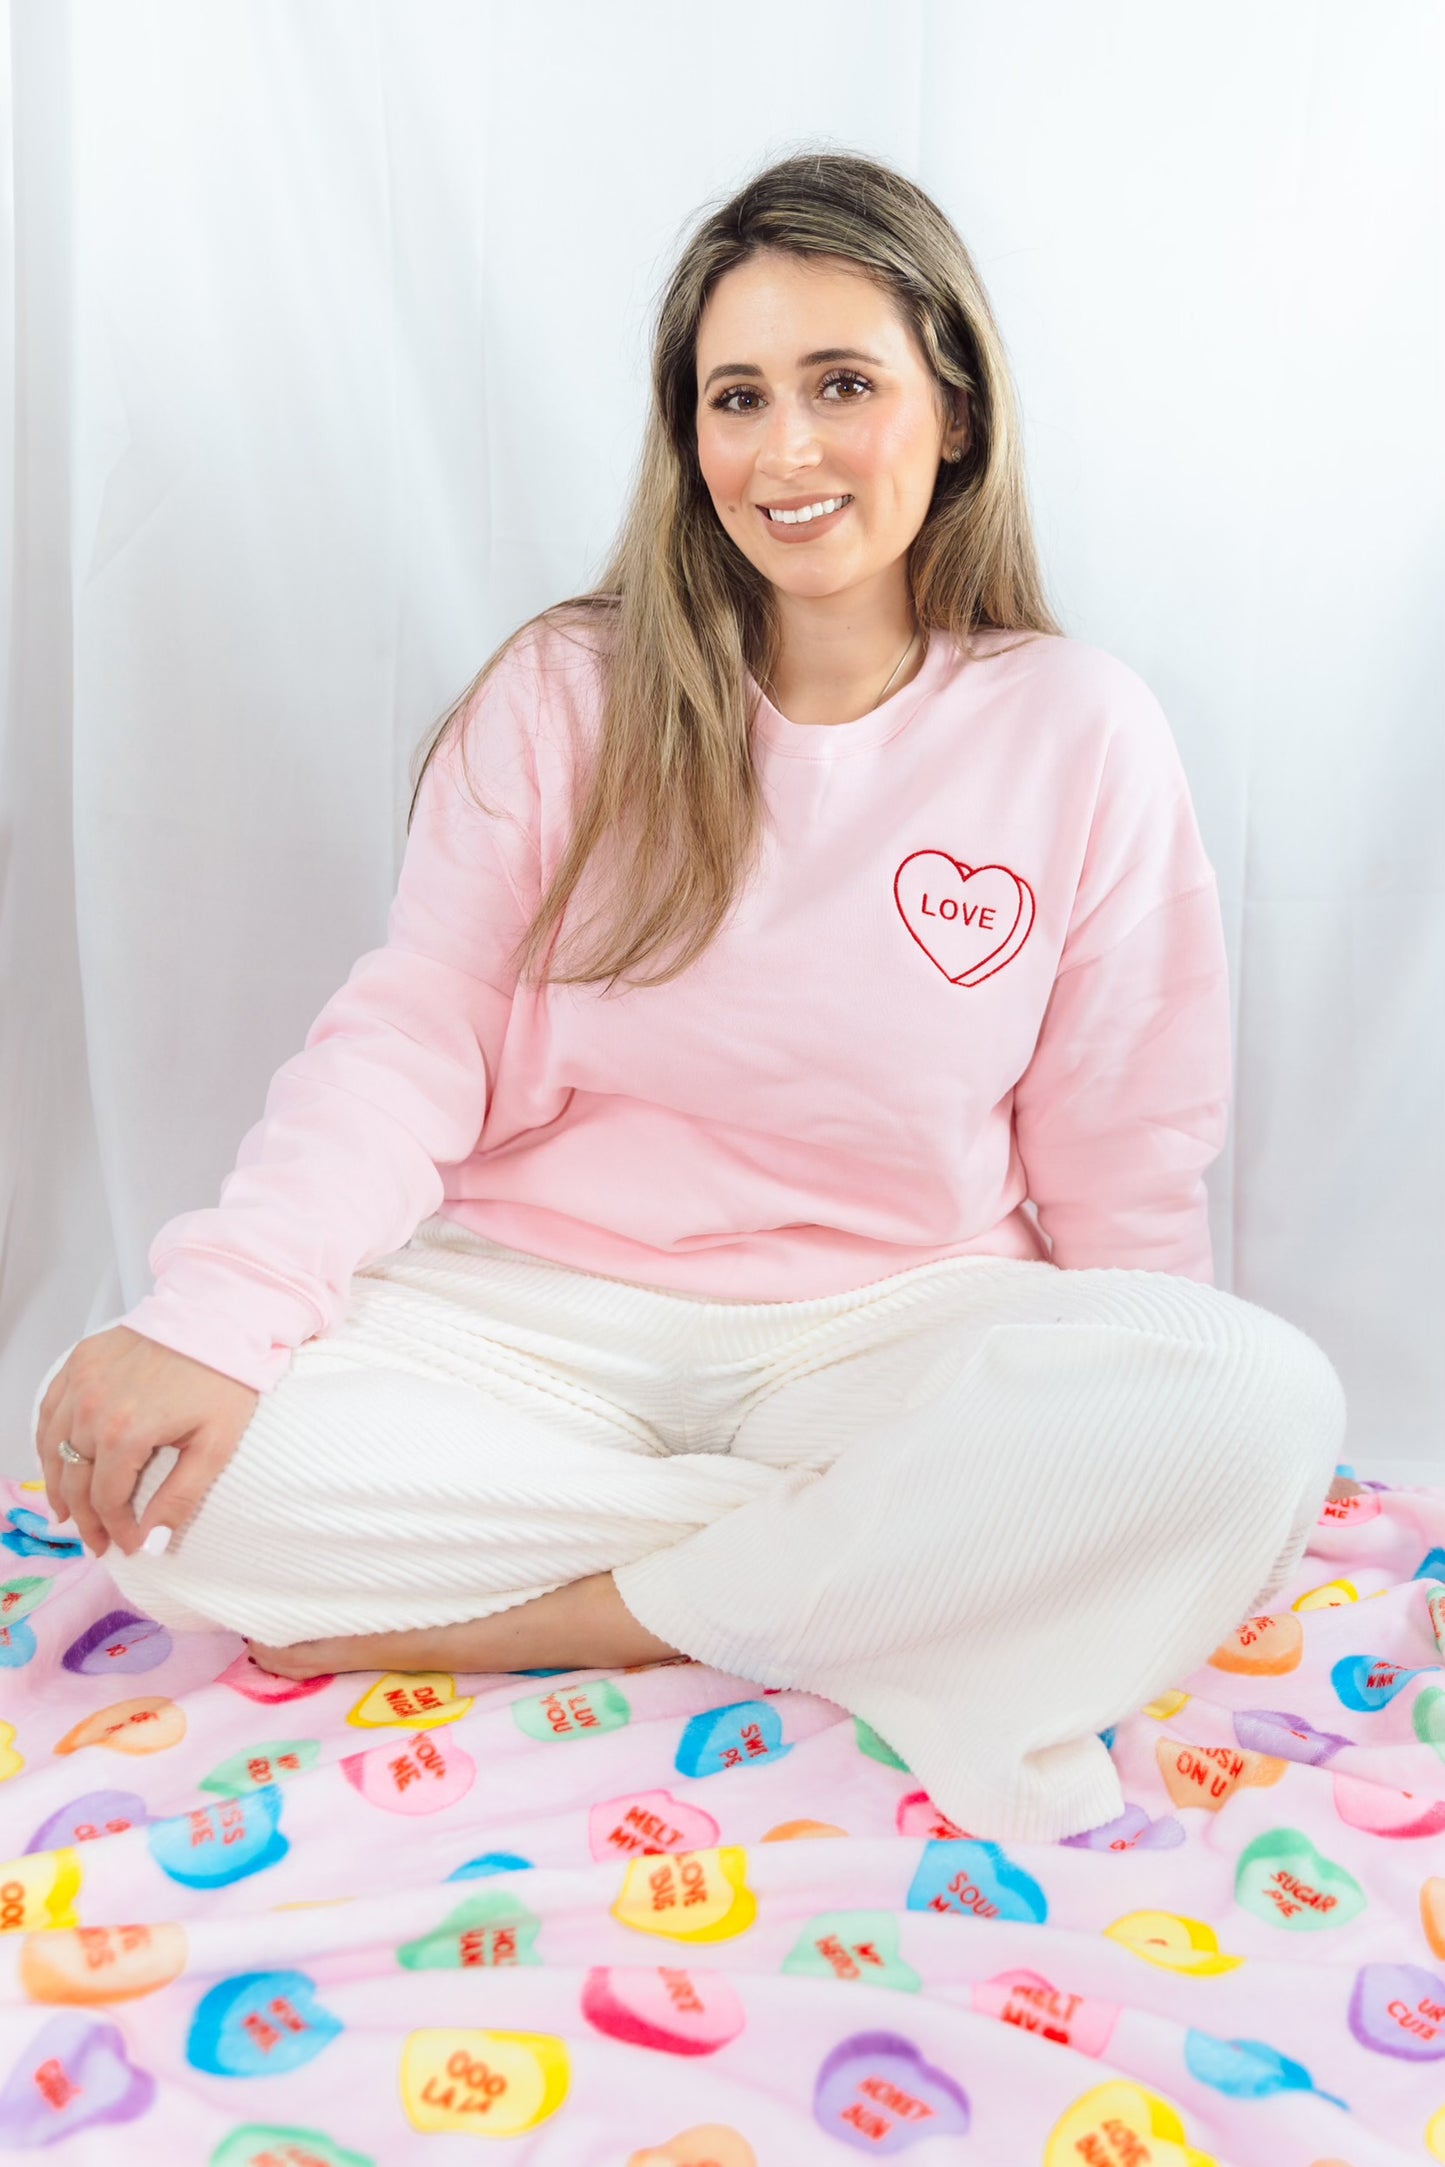 Candy Heart - LOVE - Embroidered Sweatshirt